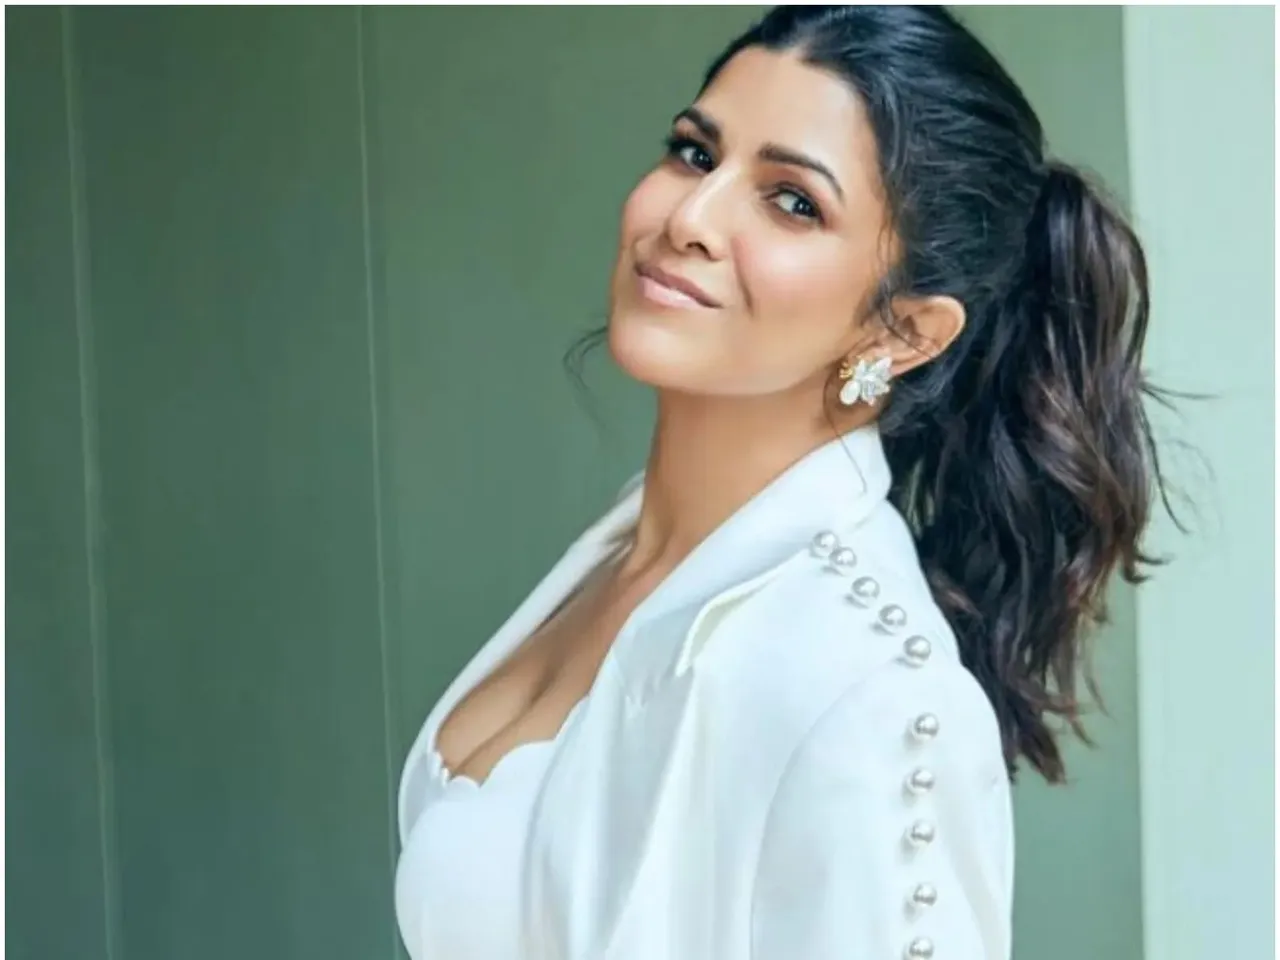 Nimrat Kaur on 'keeping freshness of life alive' with acting: It's fun to become different people